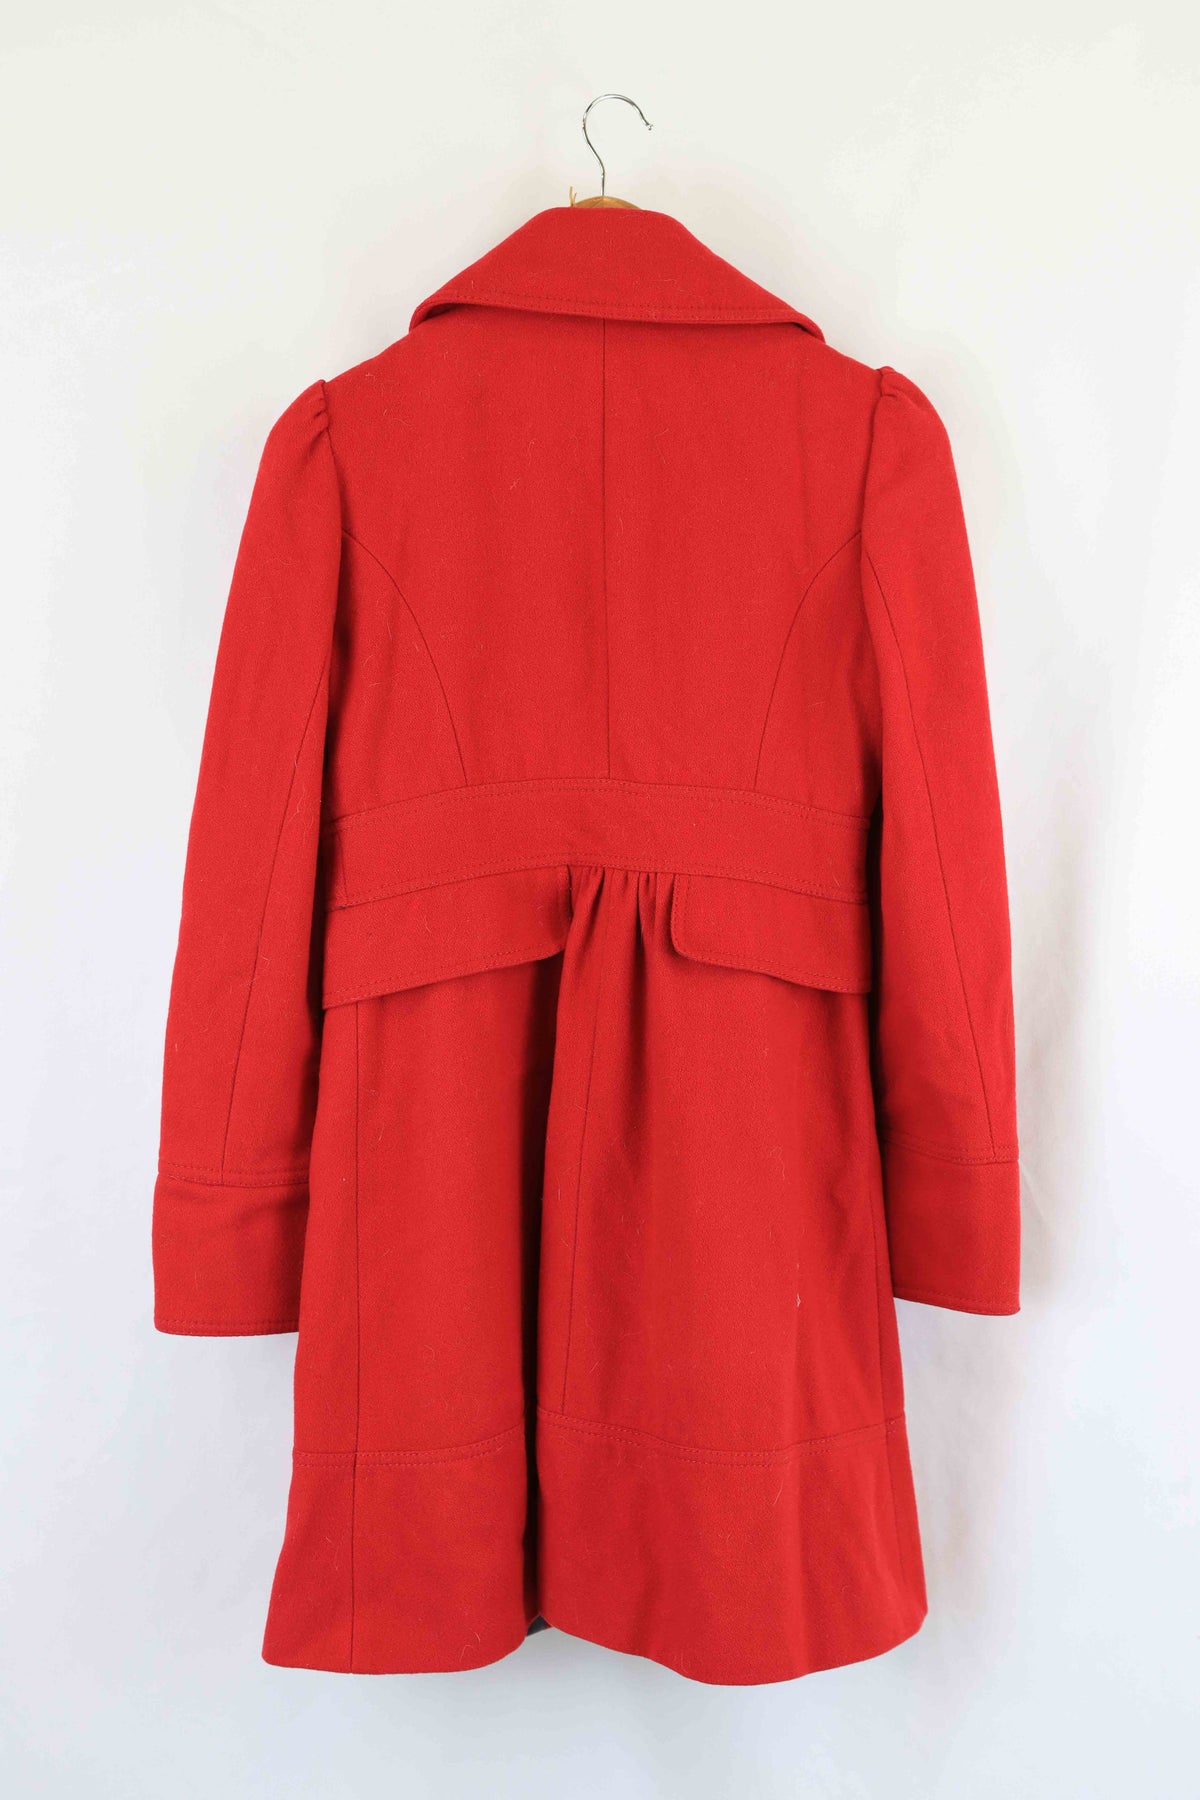 Monsoon Fusion Red Jacket 10